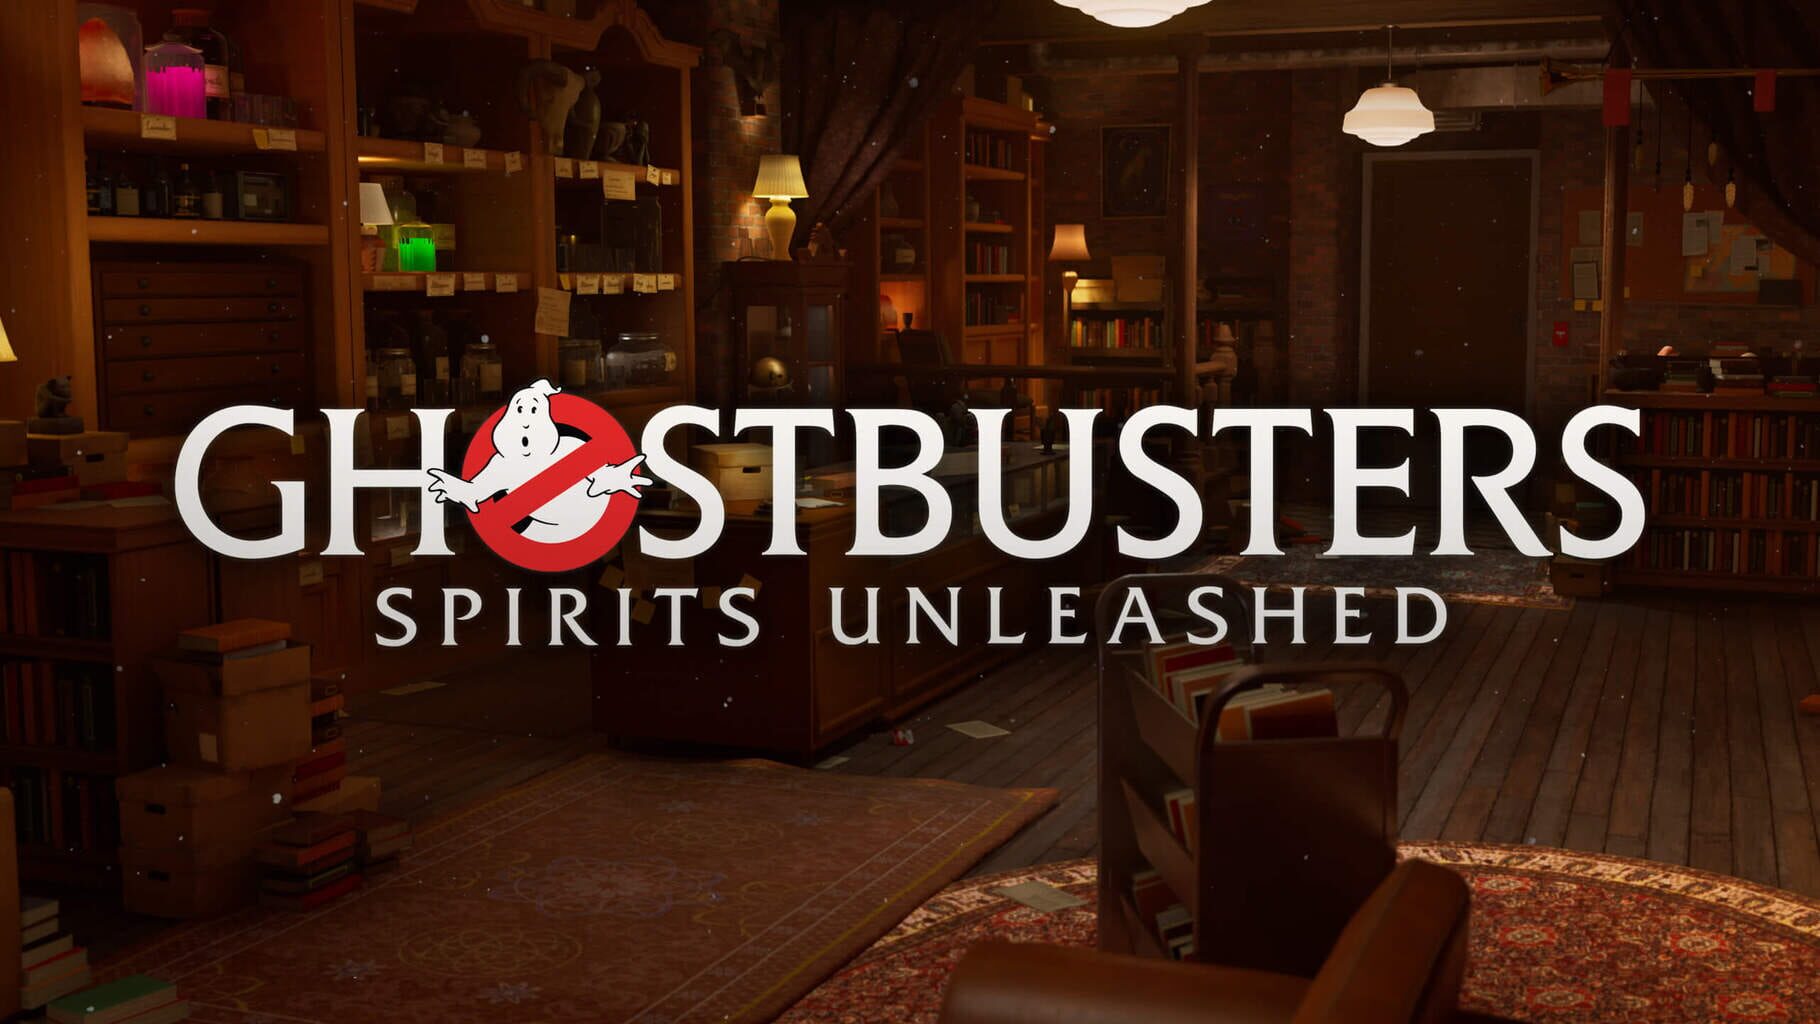 Arte - Ghostbusters: Spirits Unleashed